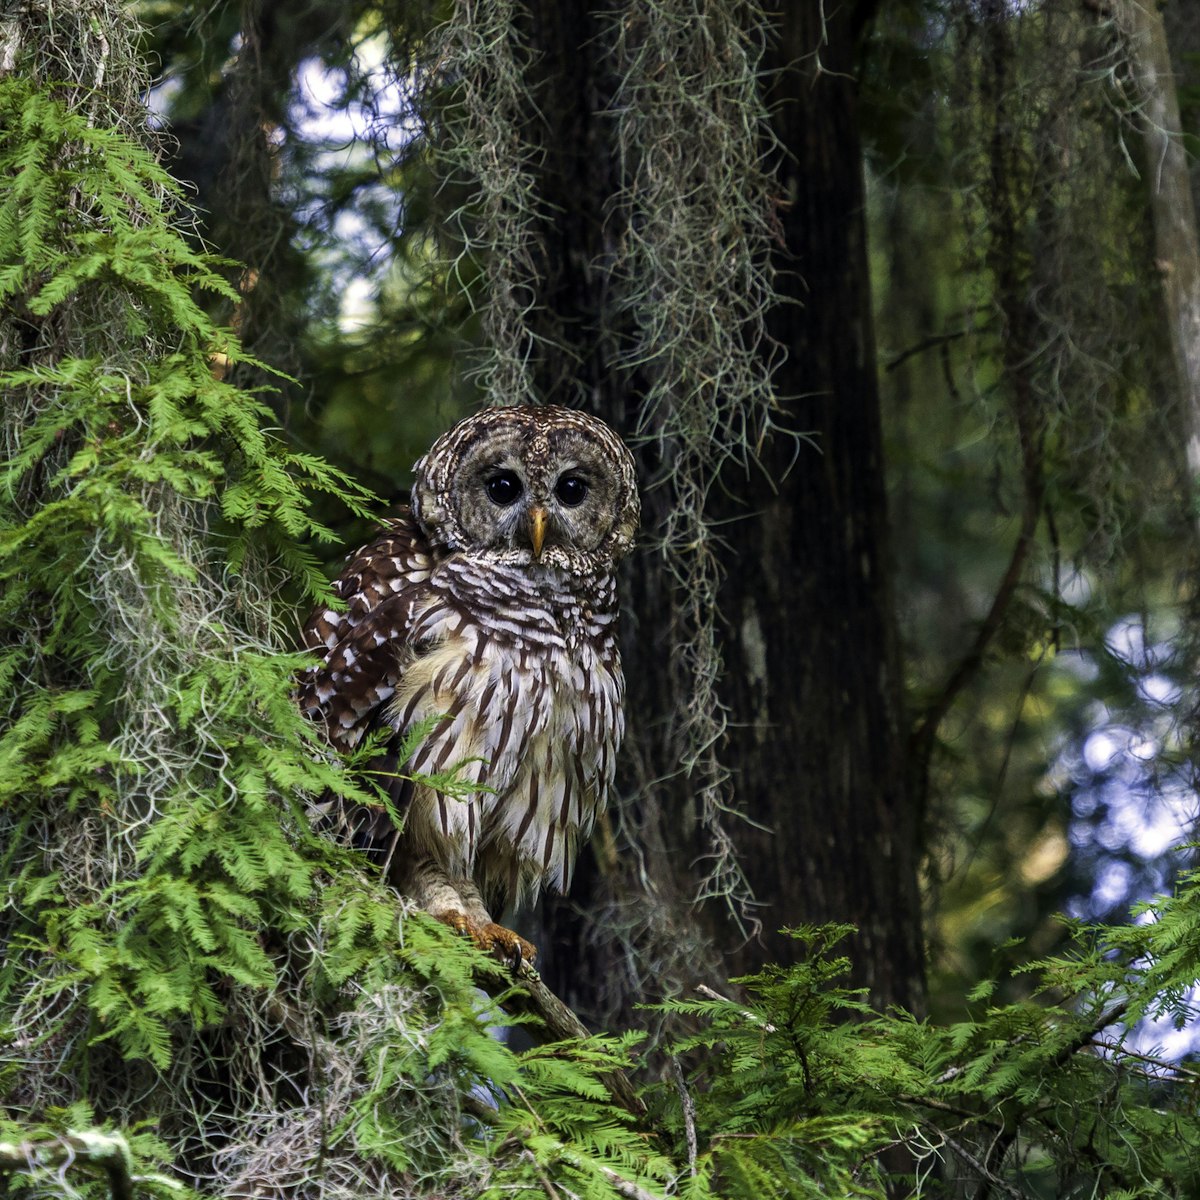 Barred Owls (Strix varia) have been a part of the natural scene for many, many thousands of years and can be found from Maine to Florida. They have a distinctive rich baritone "voice" But, you are more likely to hear one than see one because of their camouflage coloration.
1254417688